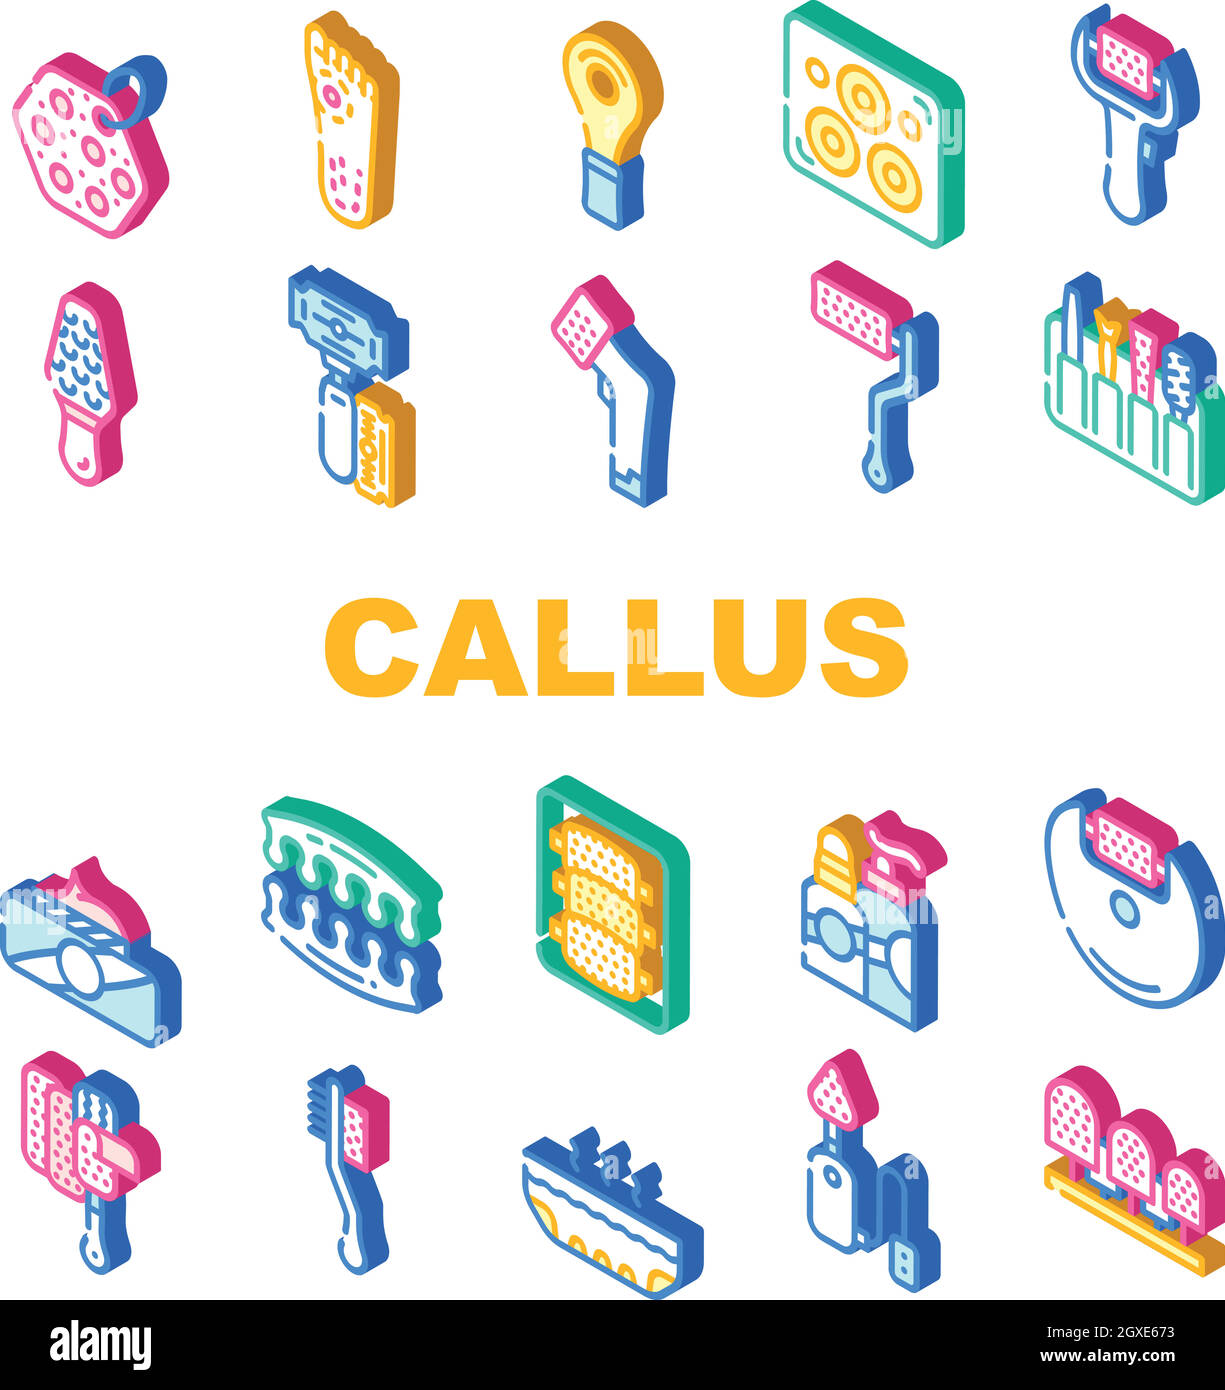 Callus Remover Tool Collection Icons Set Vector Stock Vector